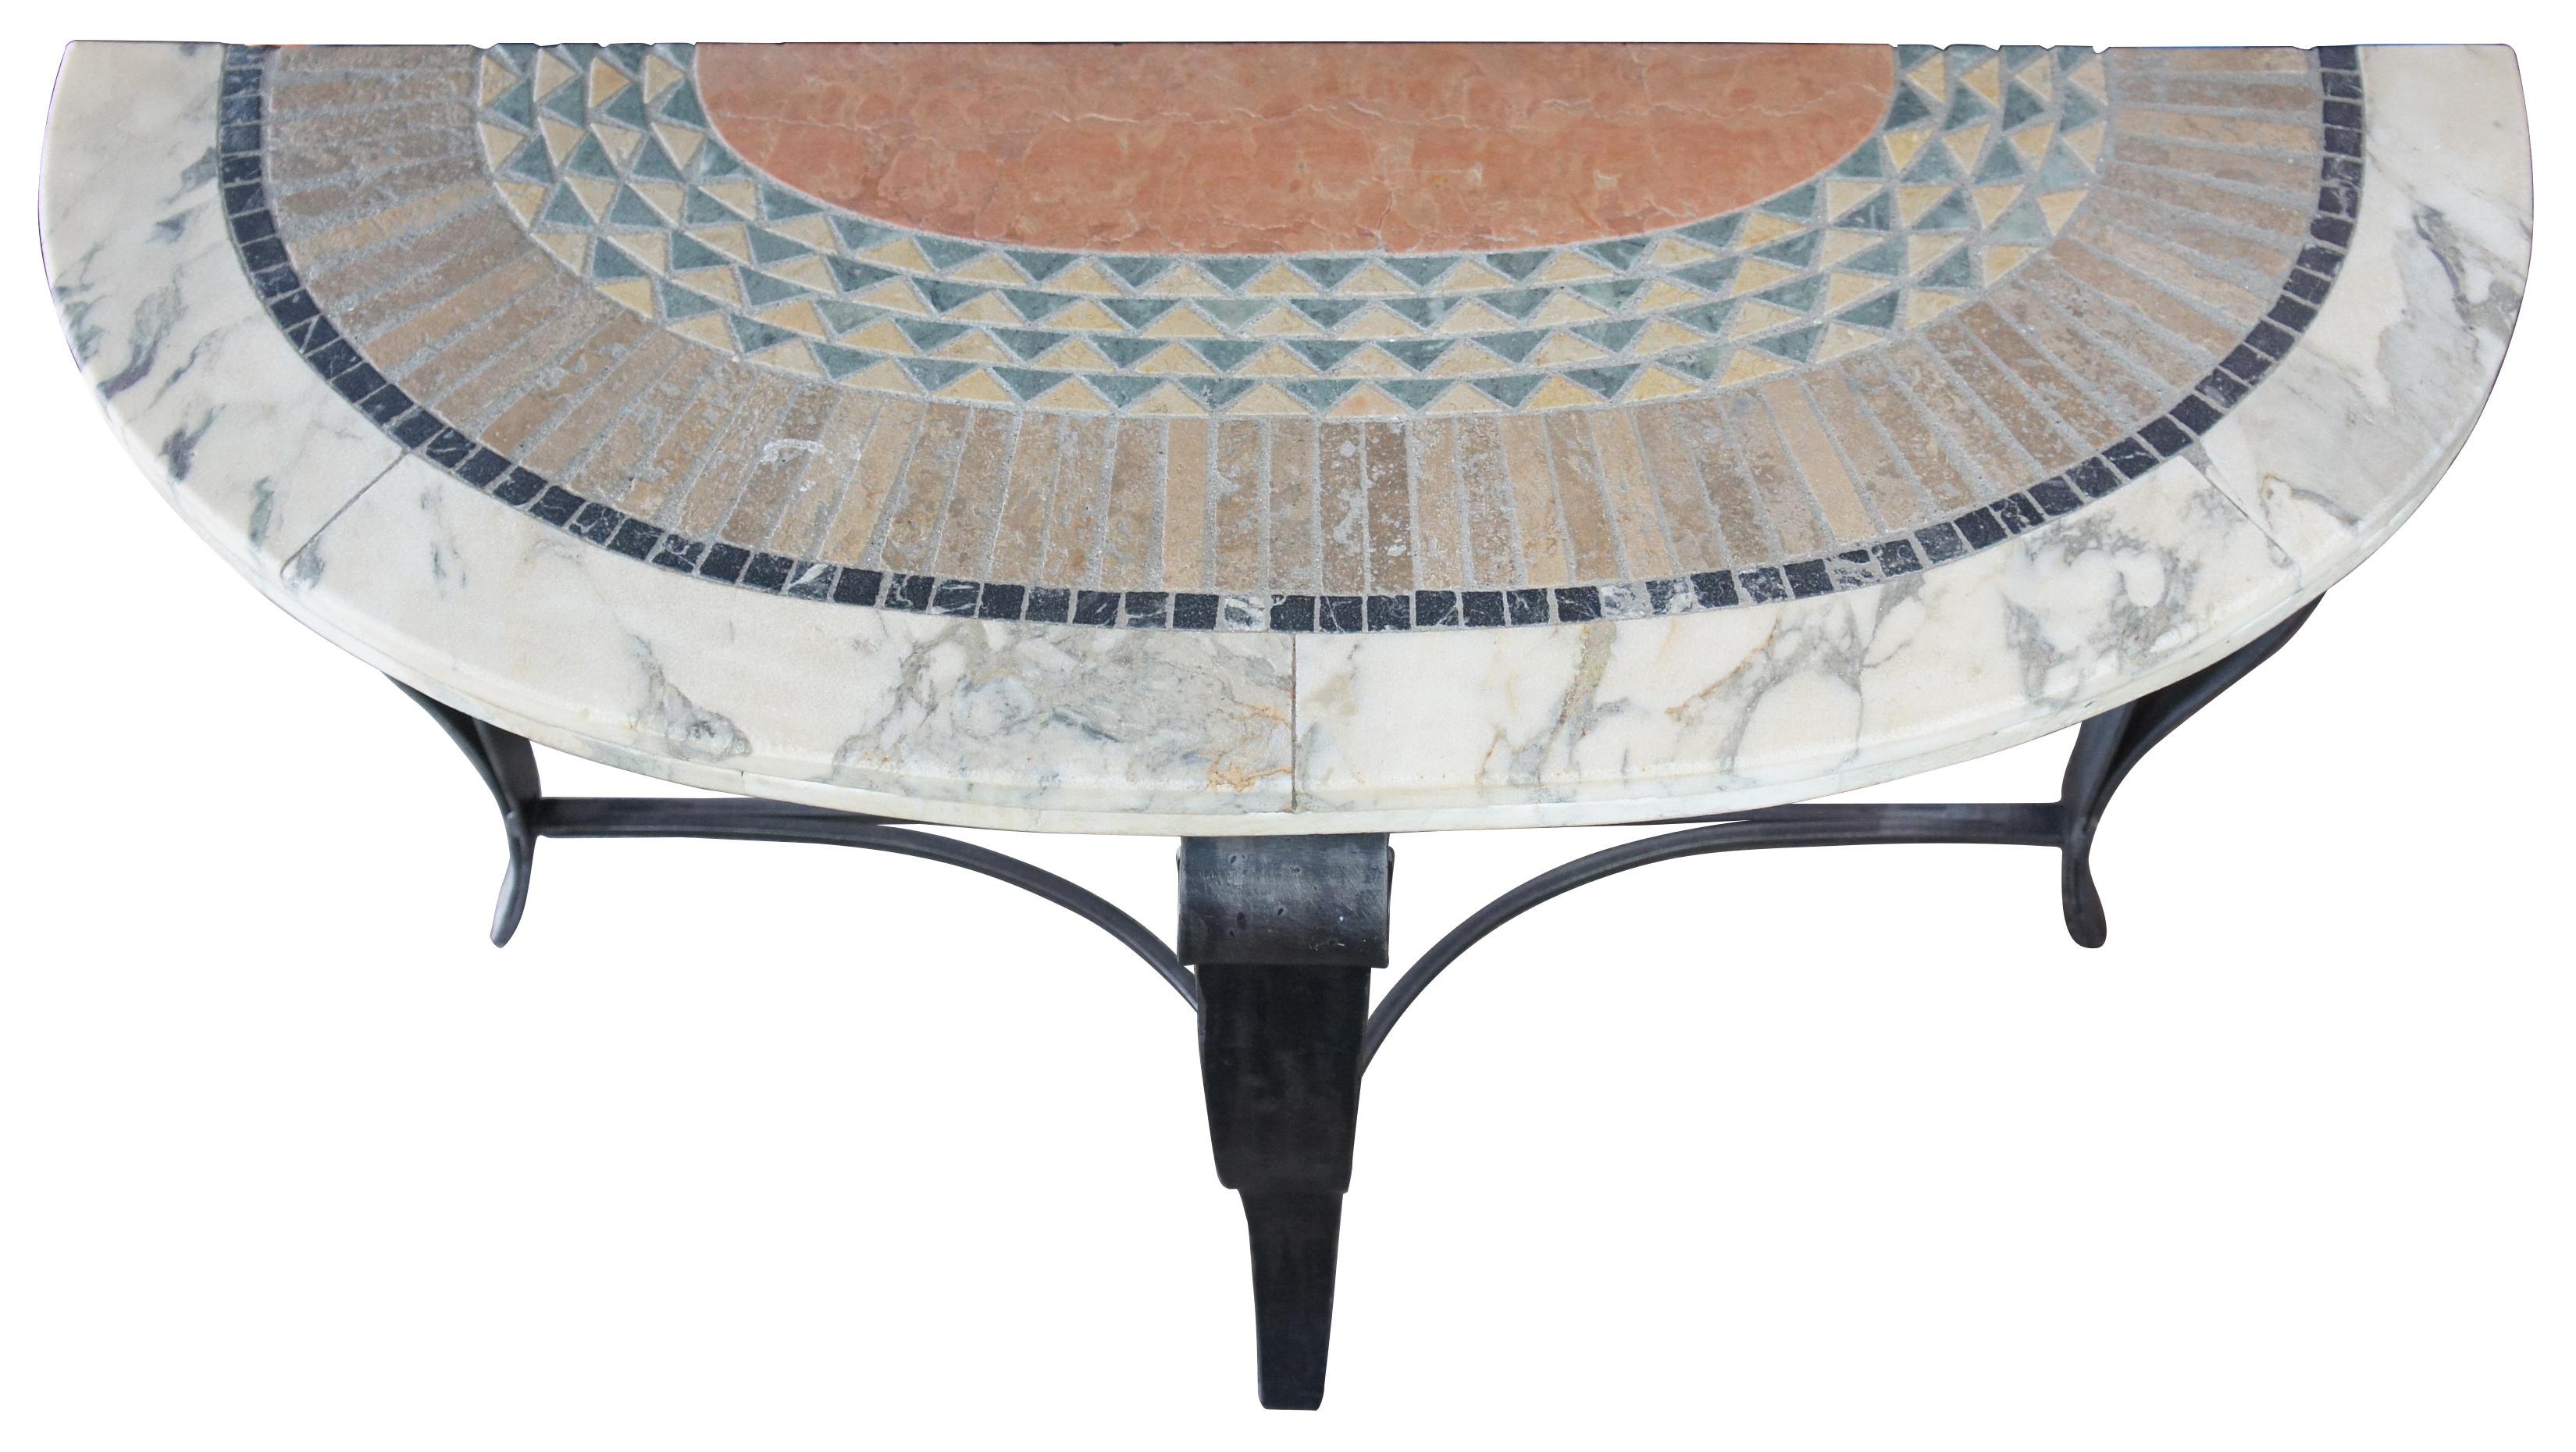 Vintage Southwestern style demilune console or entry table. Features a half round shape with geometric mosaic tiled stone top and scrolled iron base. Very heavy.
 